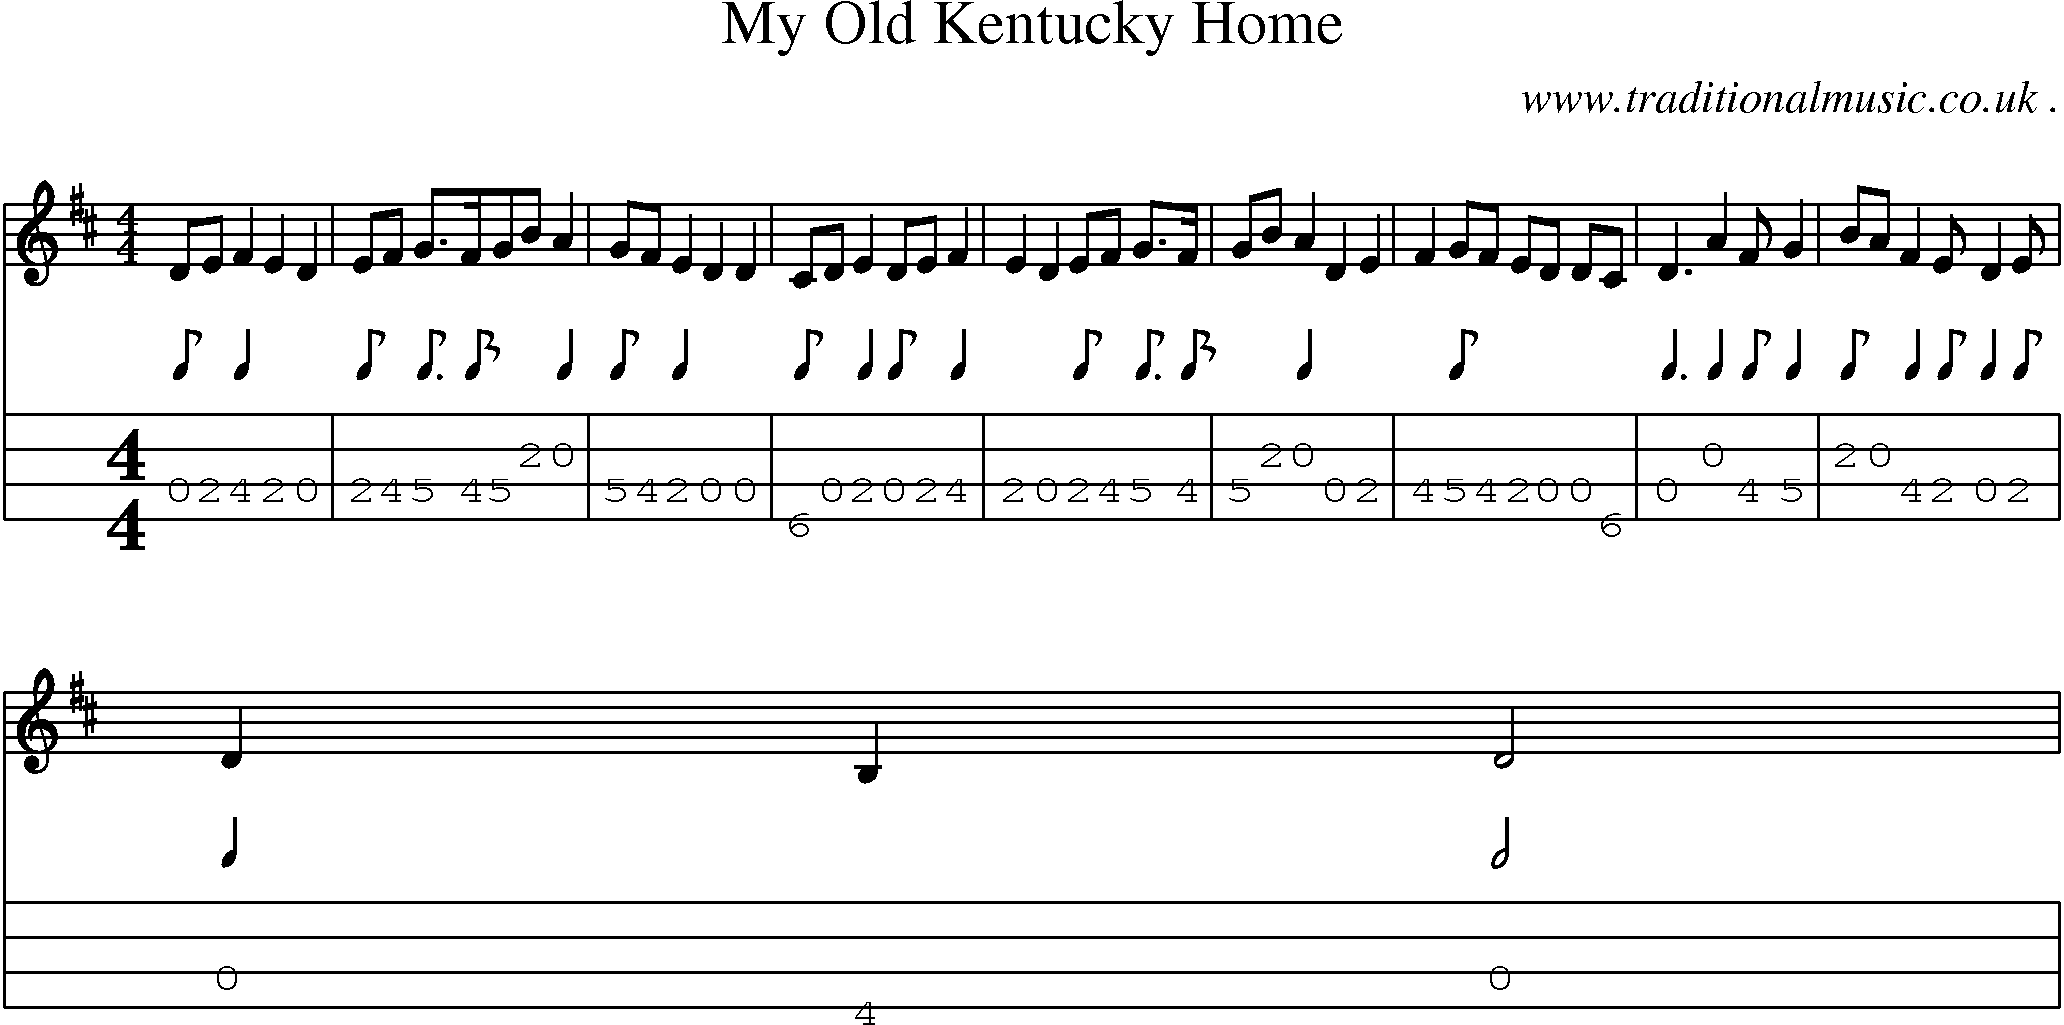 Music Score and Mandolin Tabs for My Old Kentucky Home